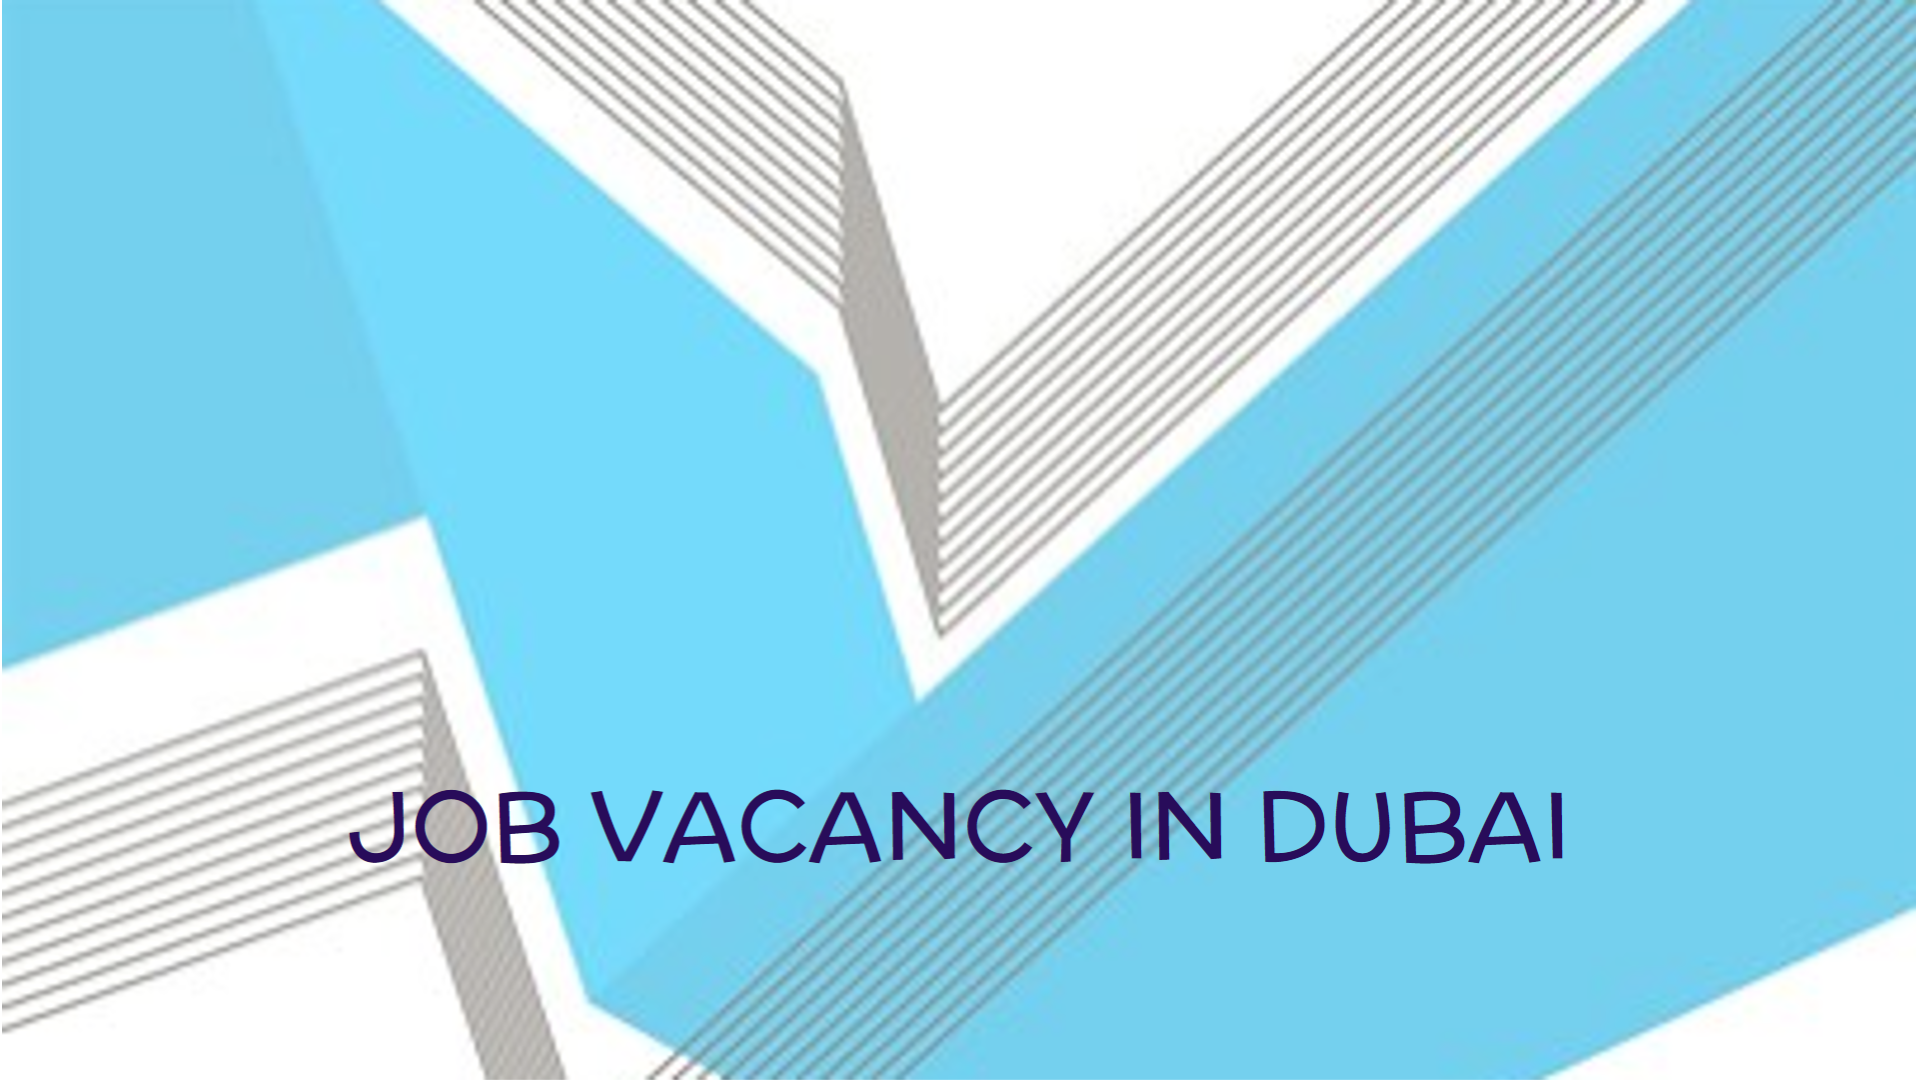 dubai job vacancy for all nationalities with salary 10,000 AED